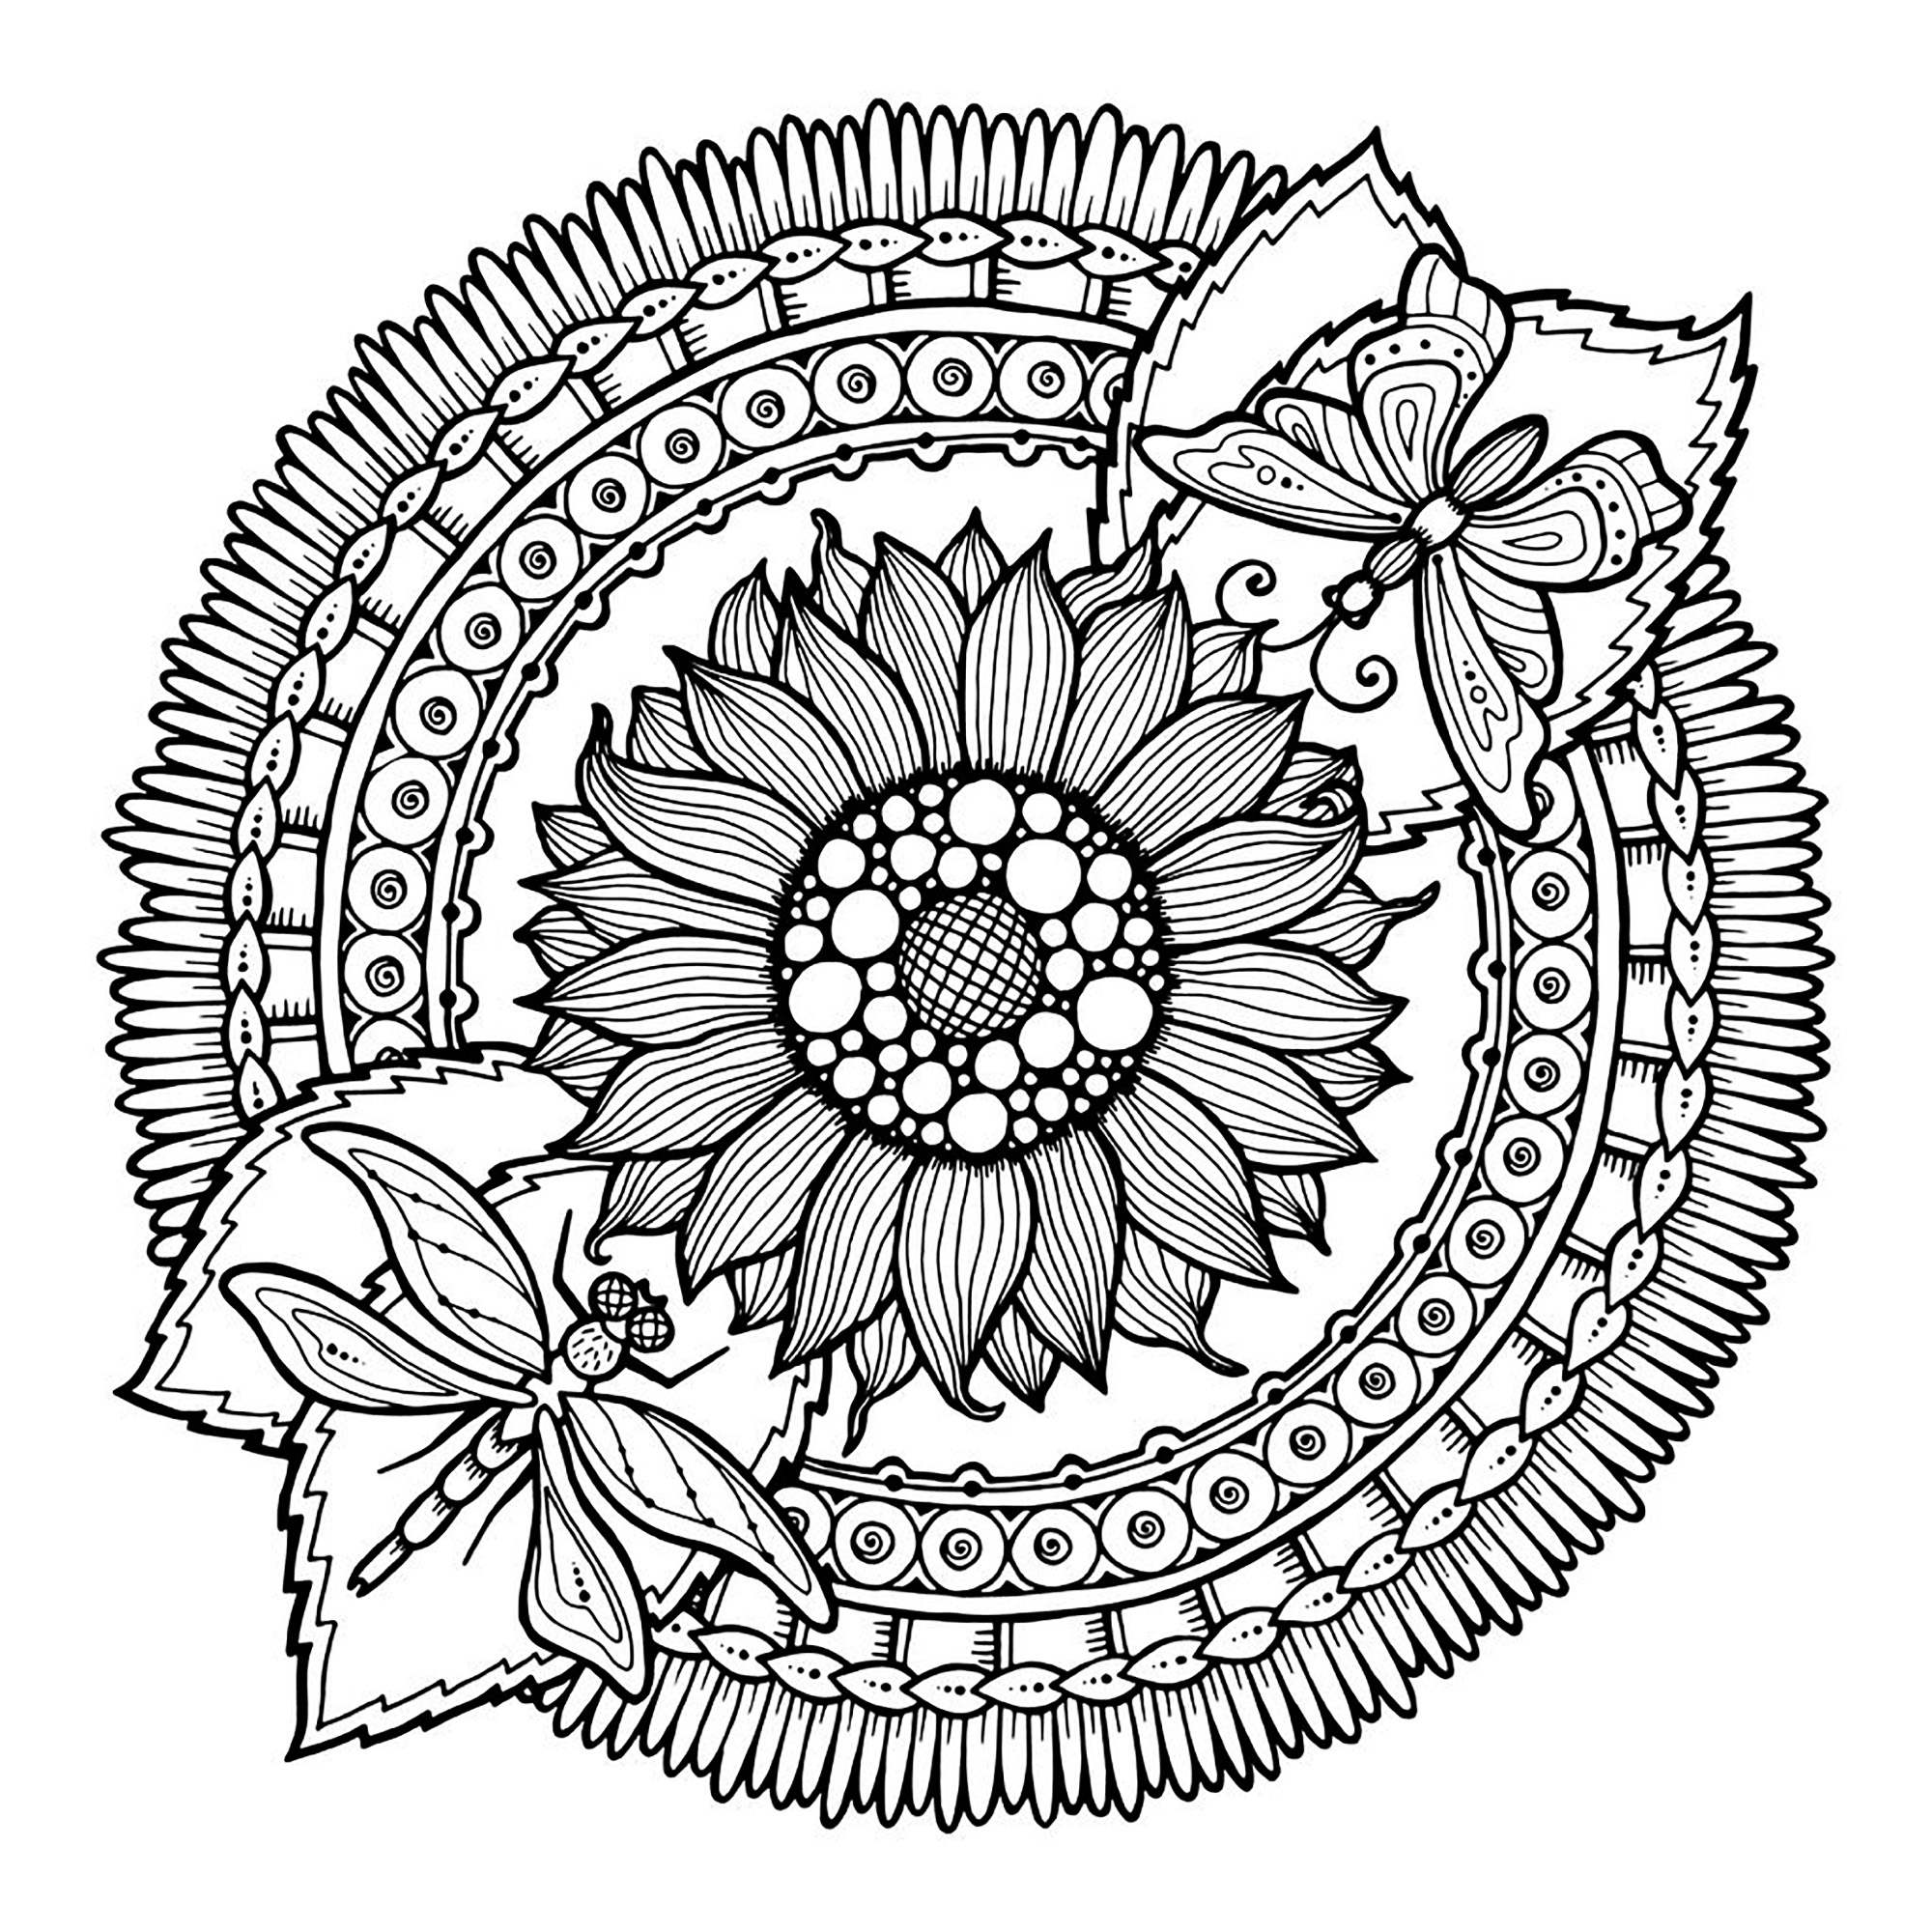 Download Mandala dragonfly and flowers - M&alas Adult Coloring Pages